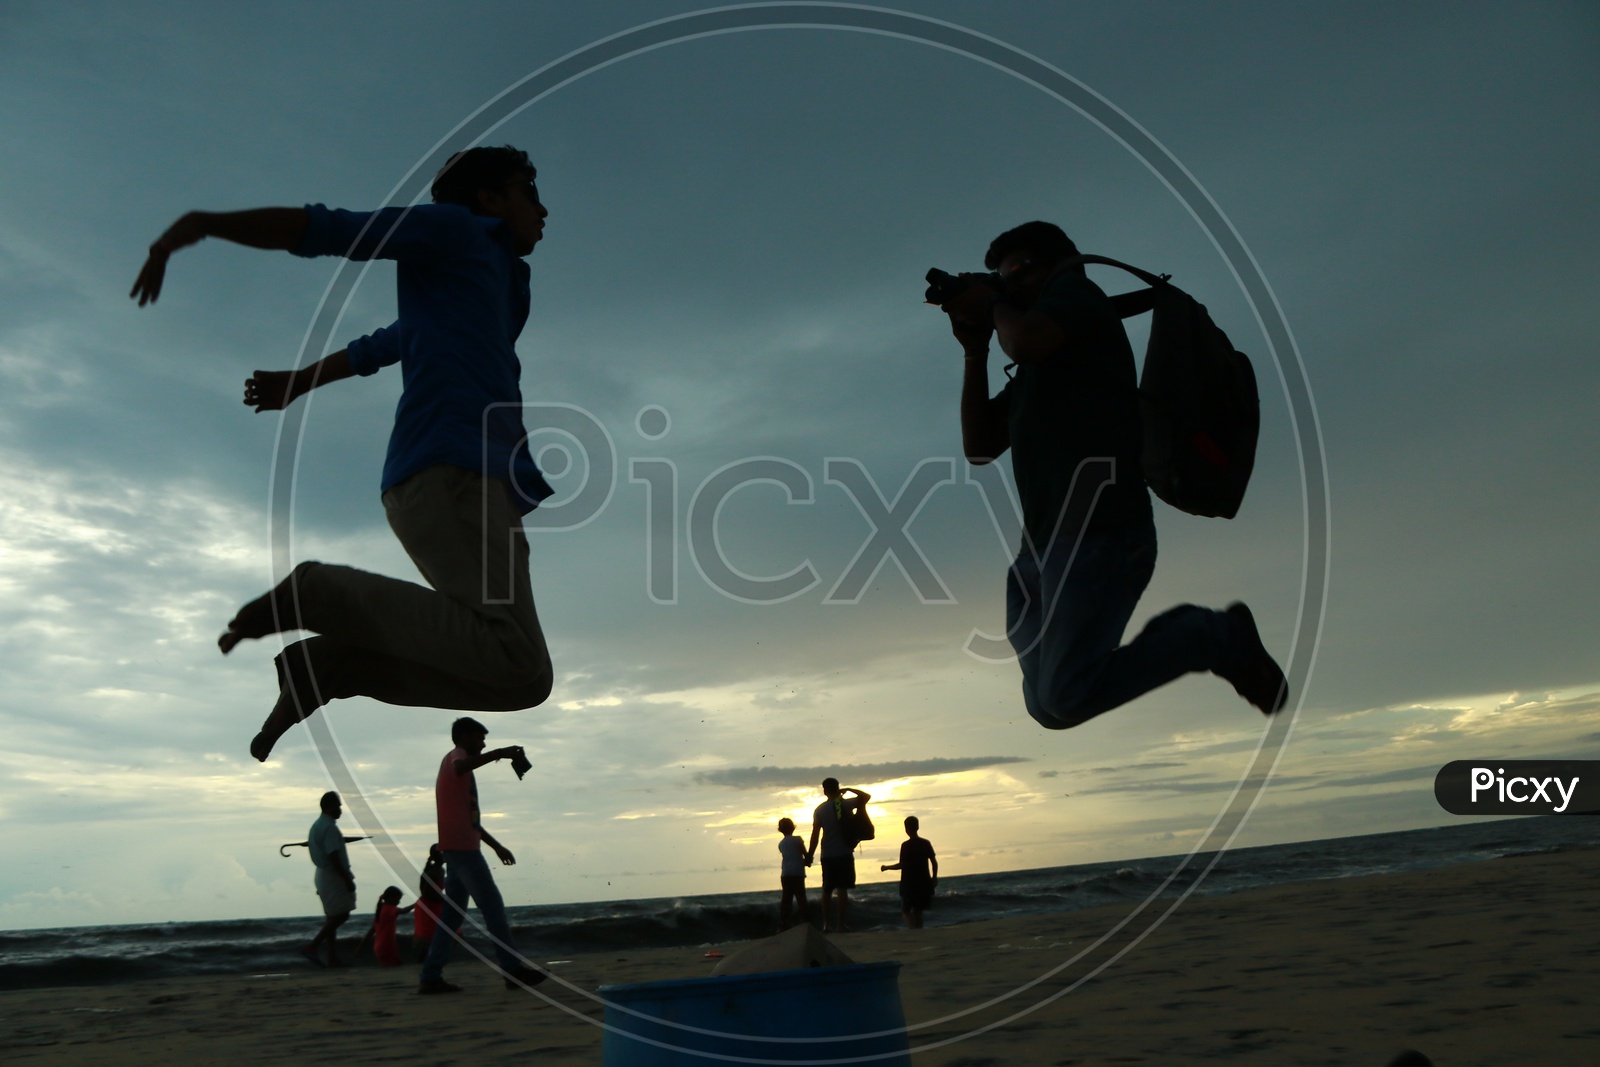 Silhouette Of a Photographer Jumping While Clicking In a Beach